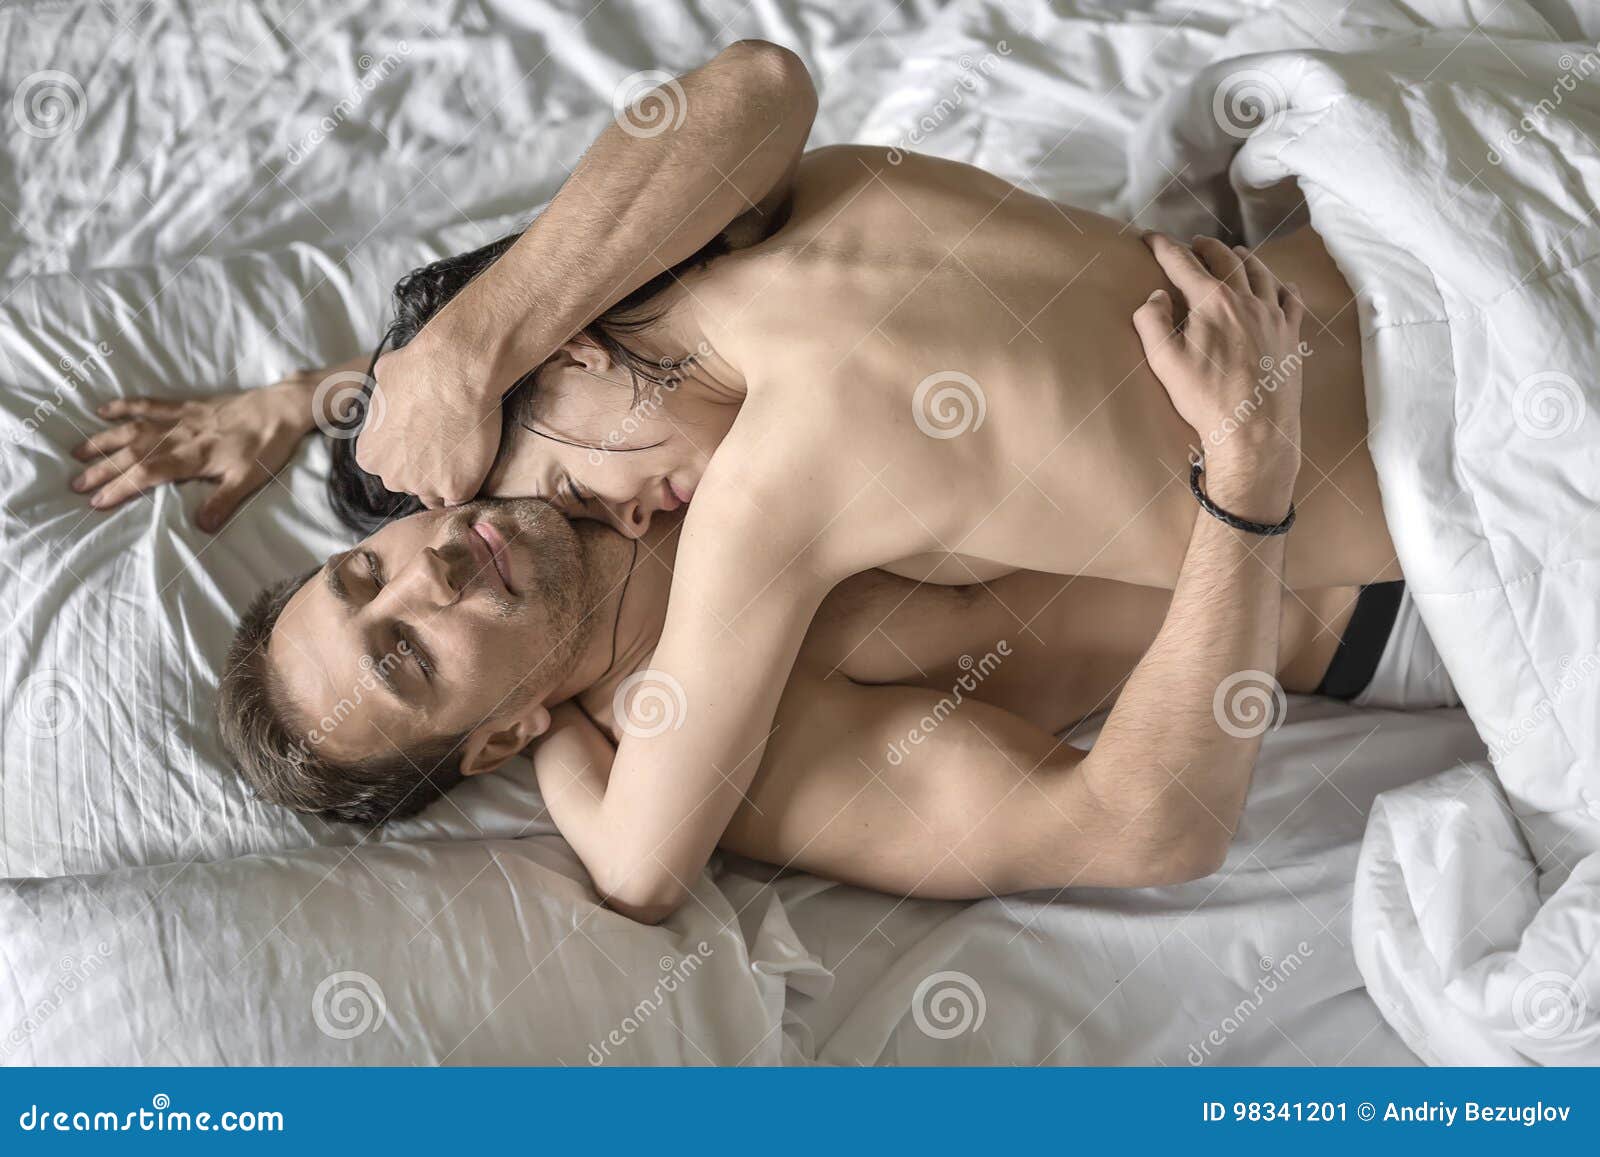 Hugging couple stock image. Image of desire, affection - 98341201